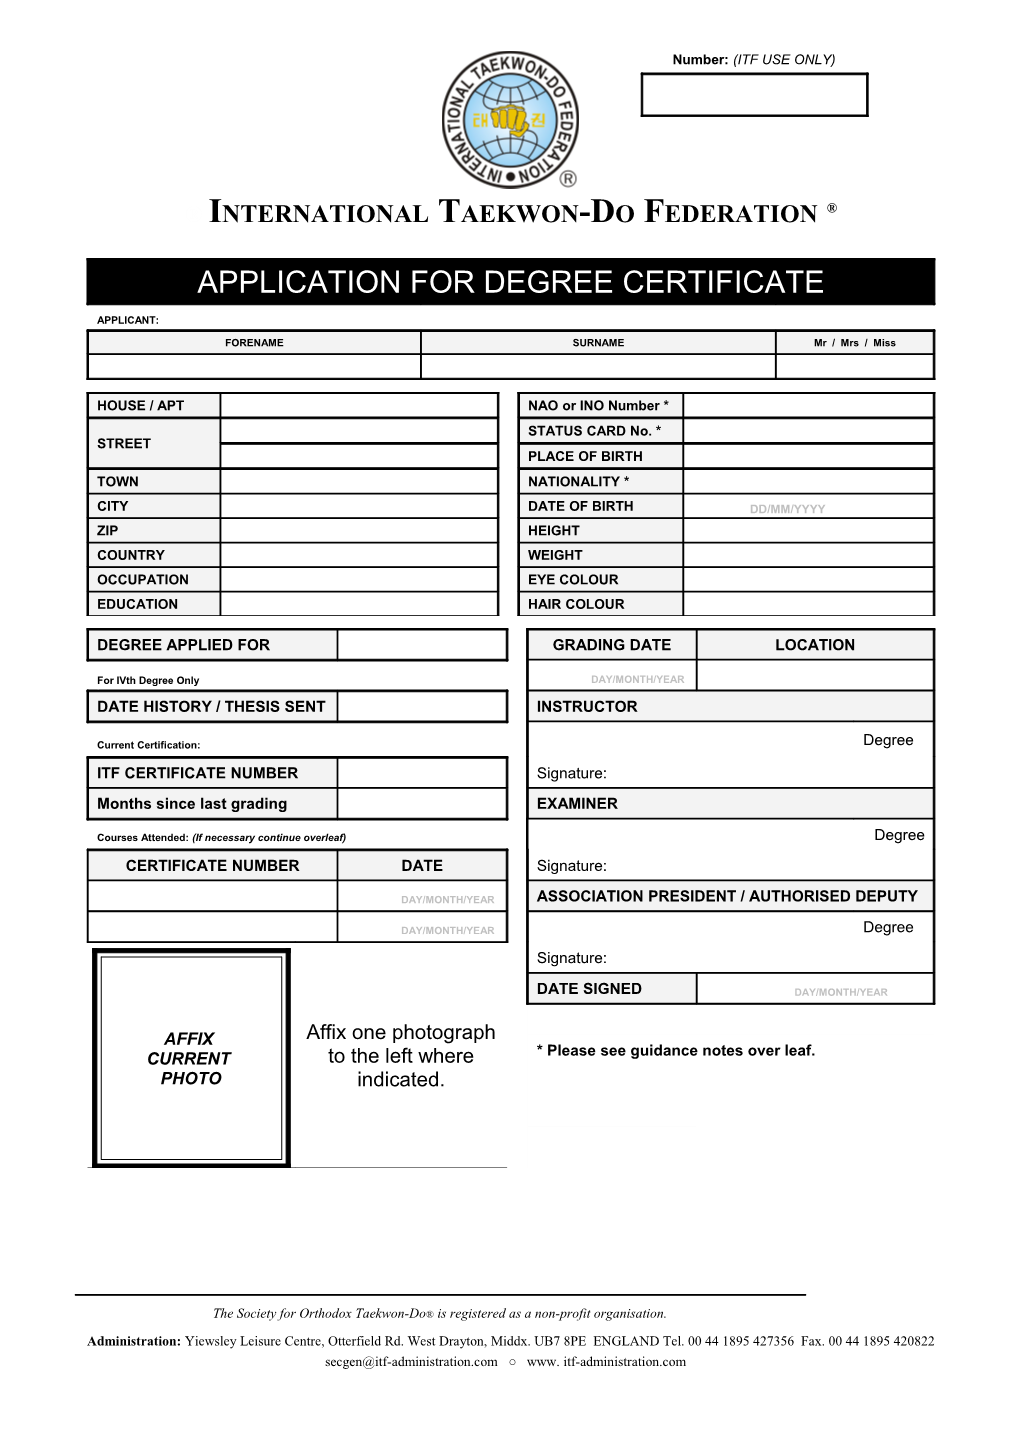 ITF Degree Certificate Application Form s1